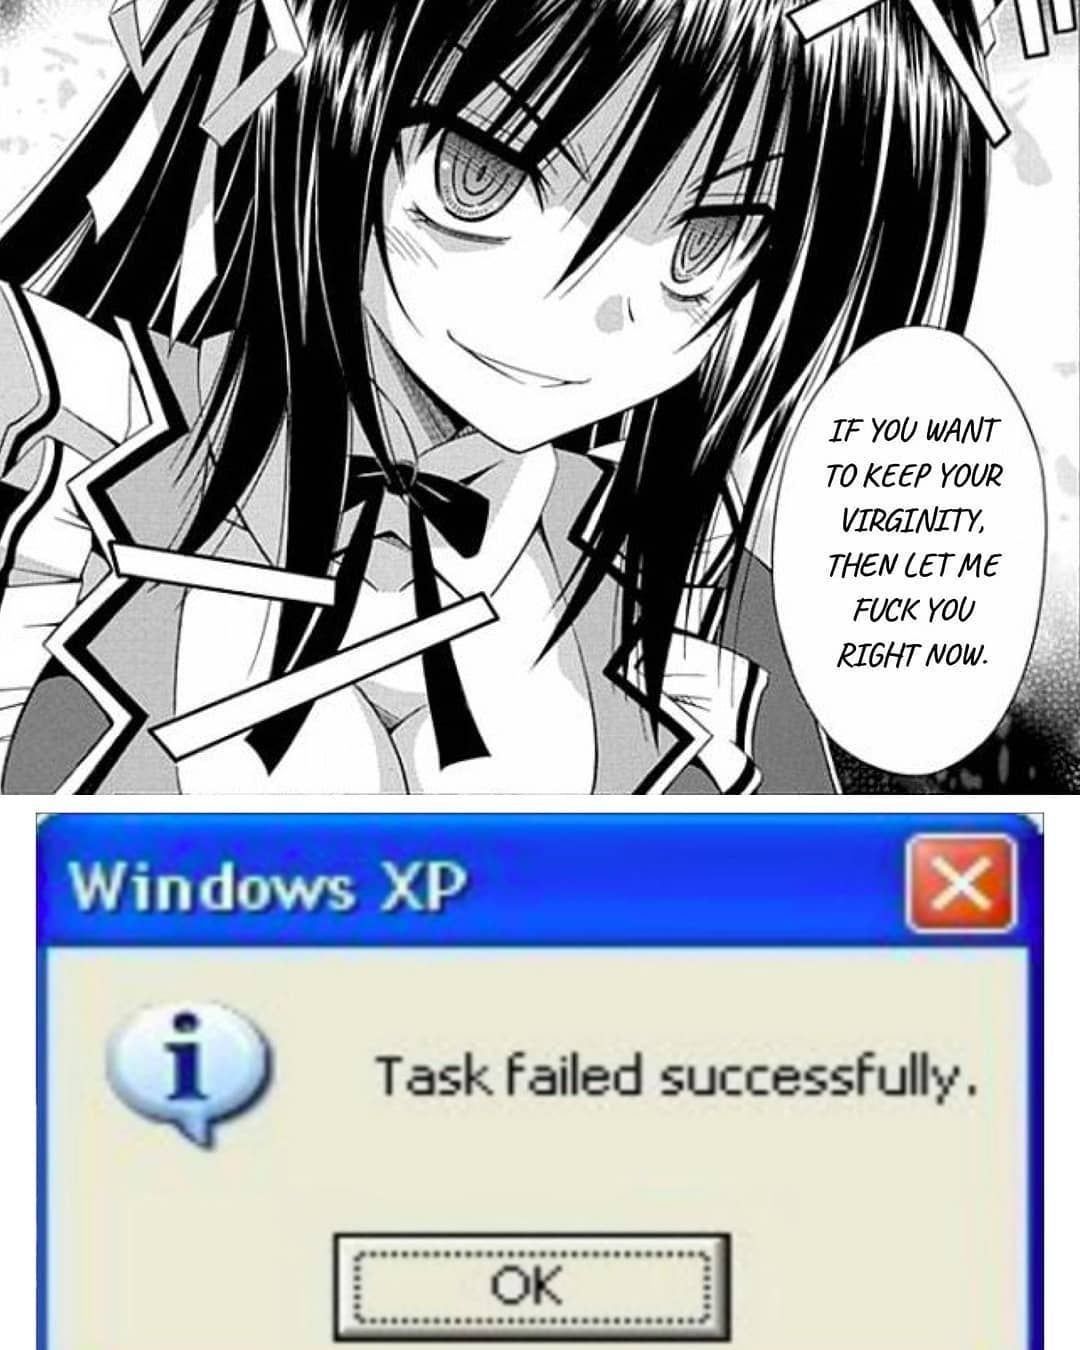 I love Windows XP because it fails successfully every time ... - meme